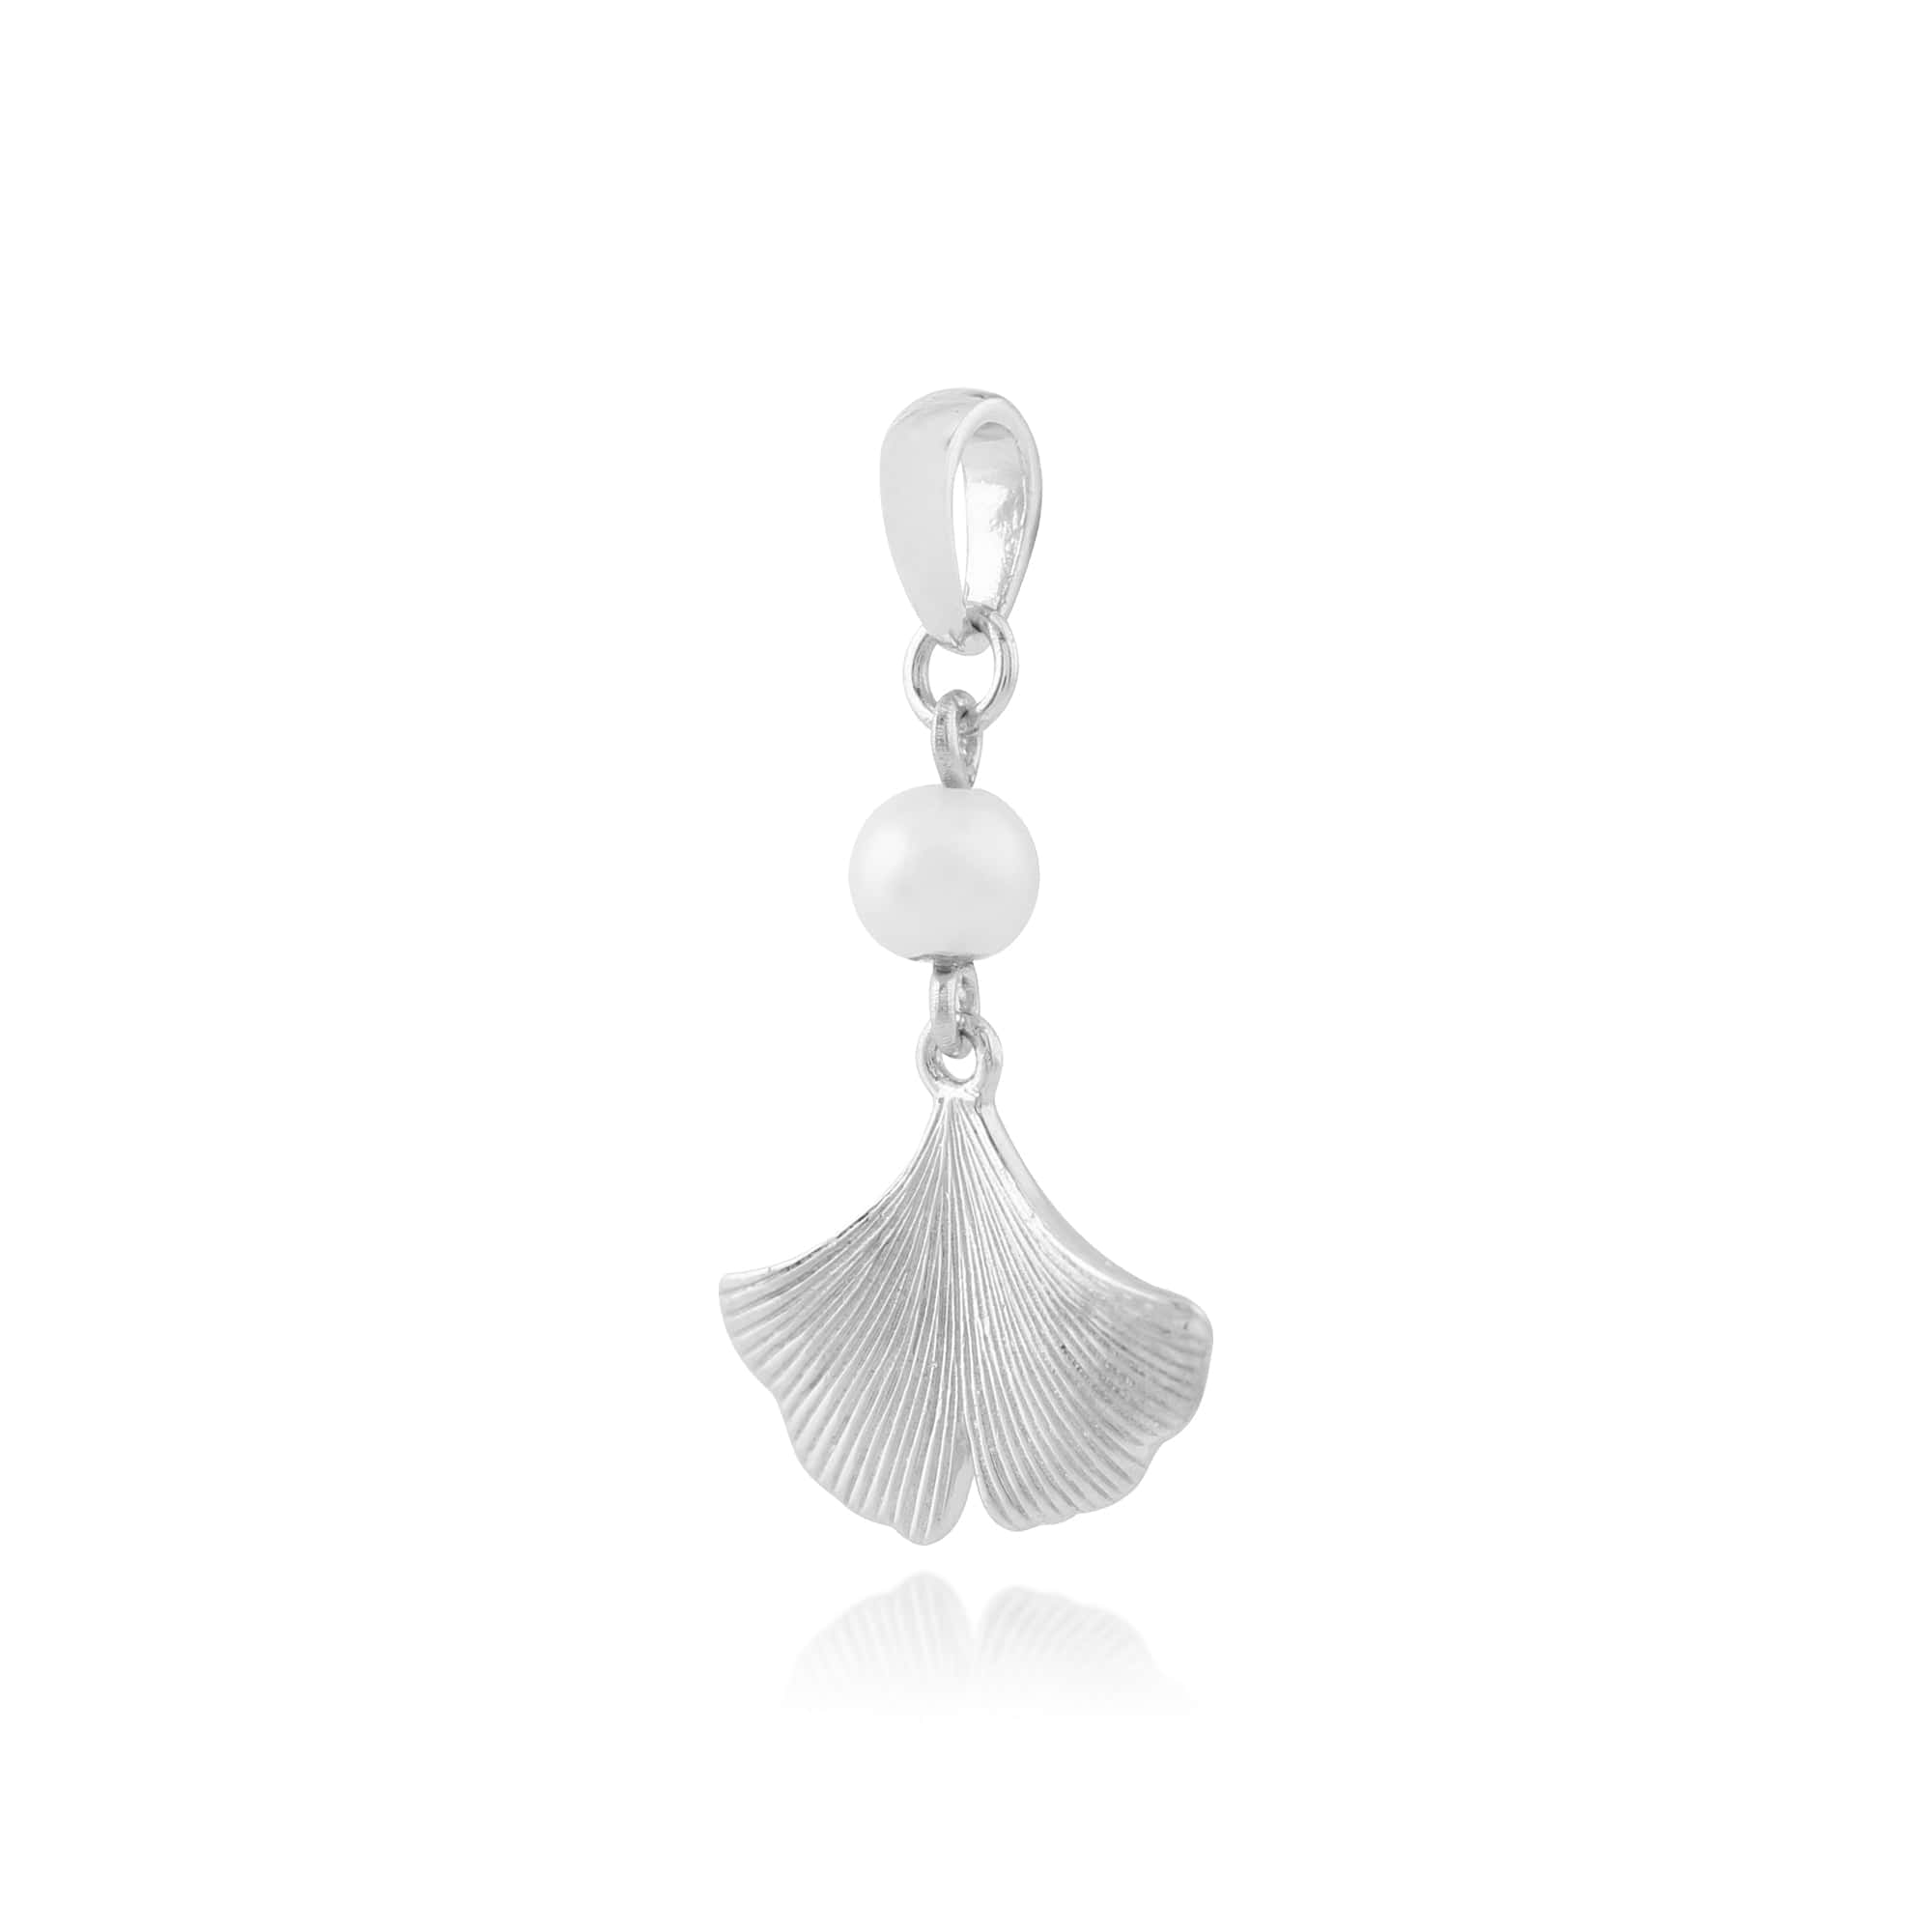 253E192601925-253P234901925 Floral Round Pearl Ginkgo Leaf Drop Earrings & Pendant Set in 925 Sterling Silver 5